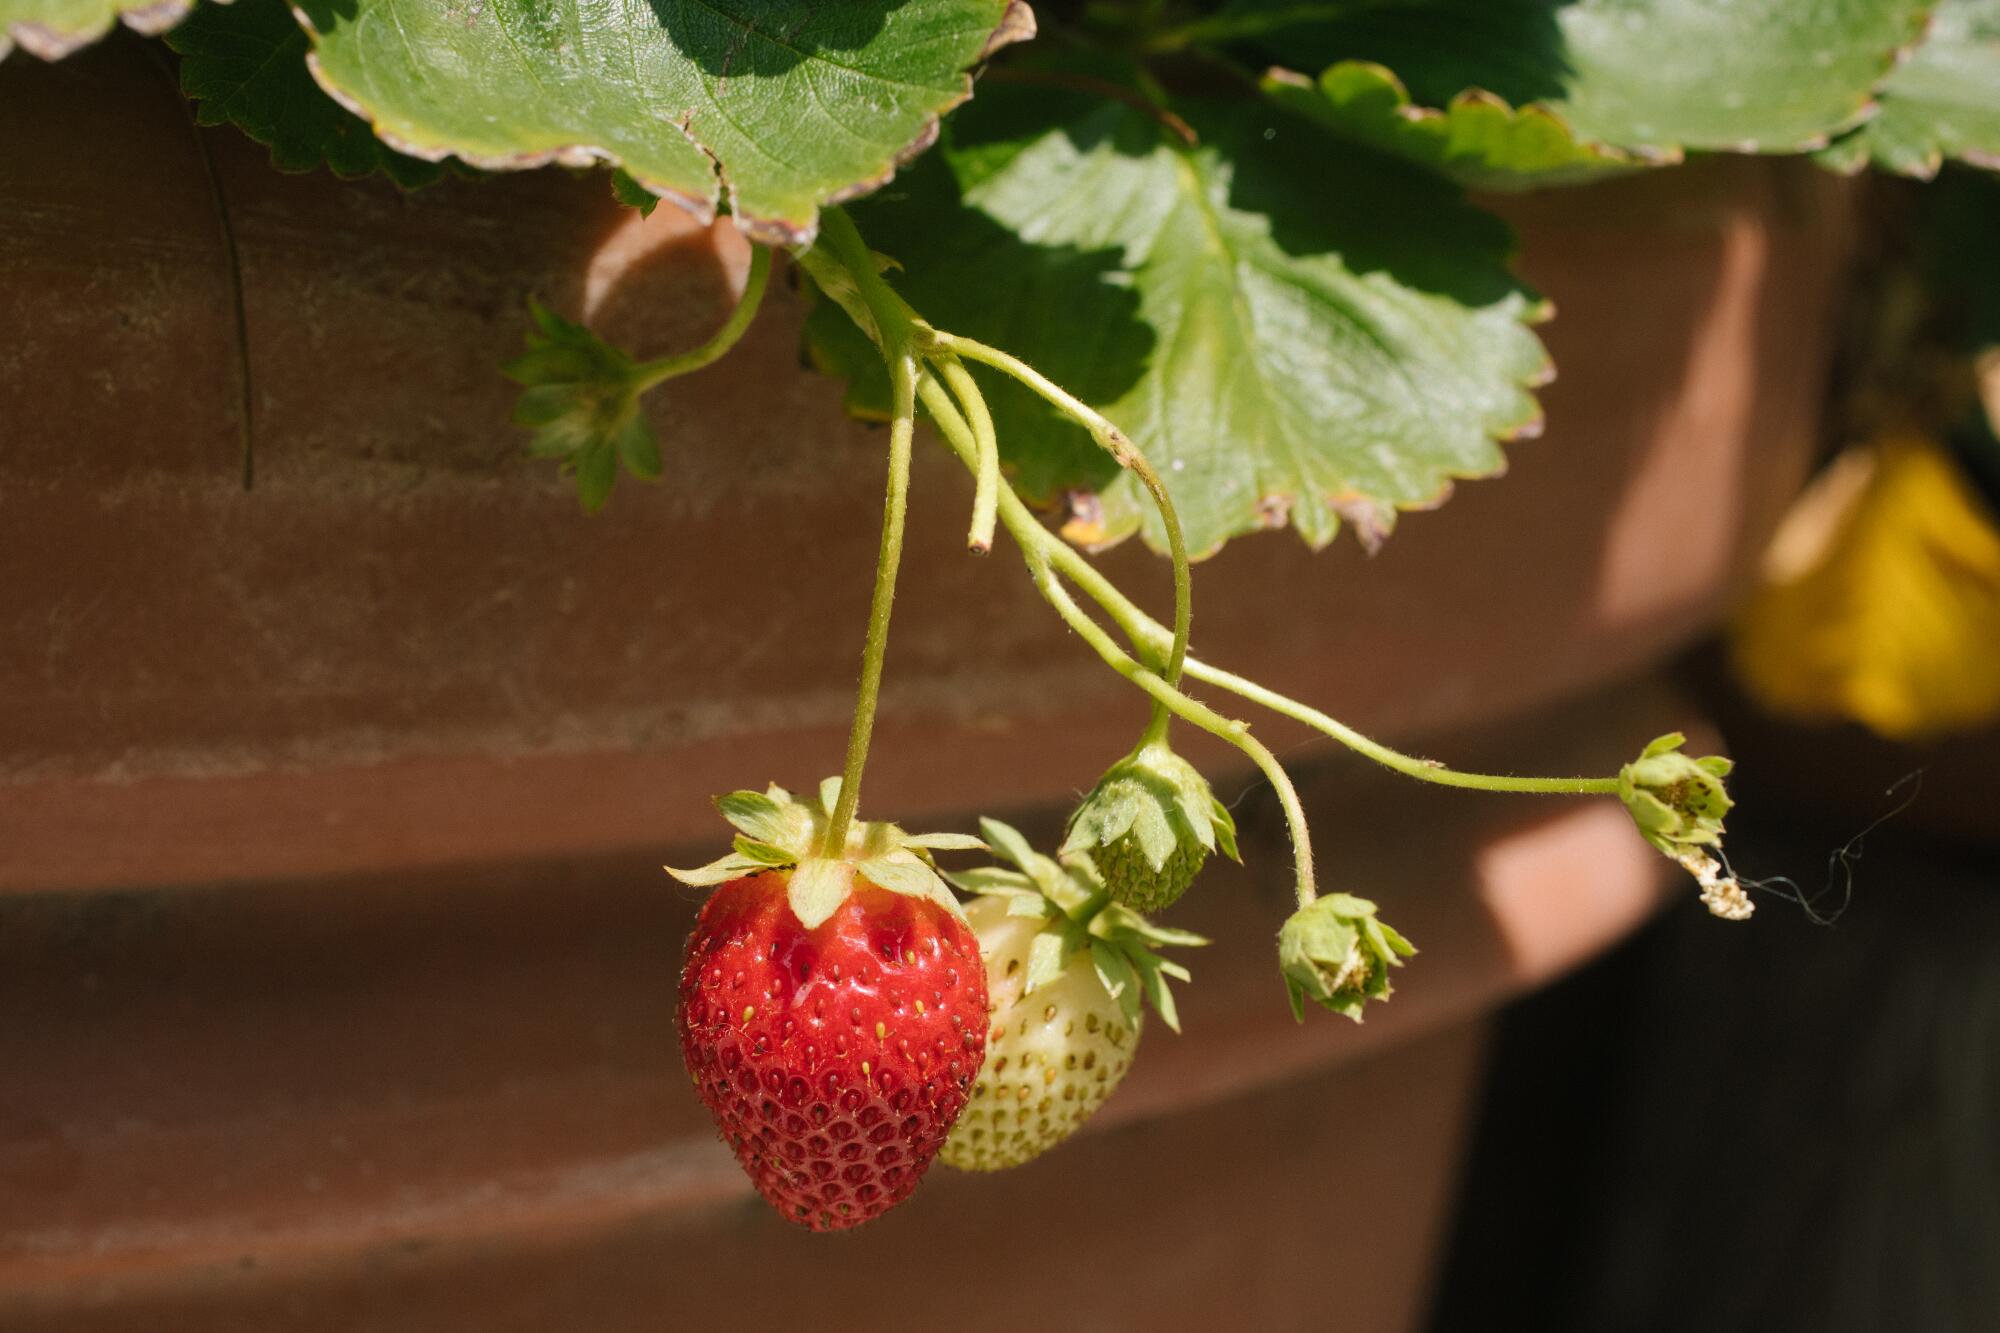 A close-up of a ripe strawberry hanging on the potted plant next to an unripe strawberry.